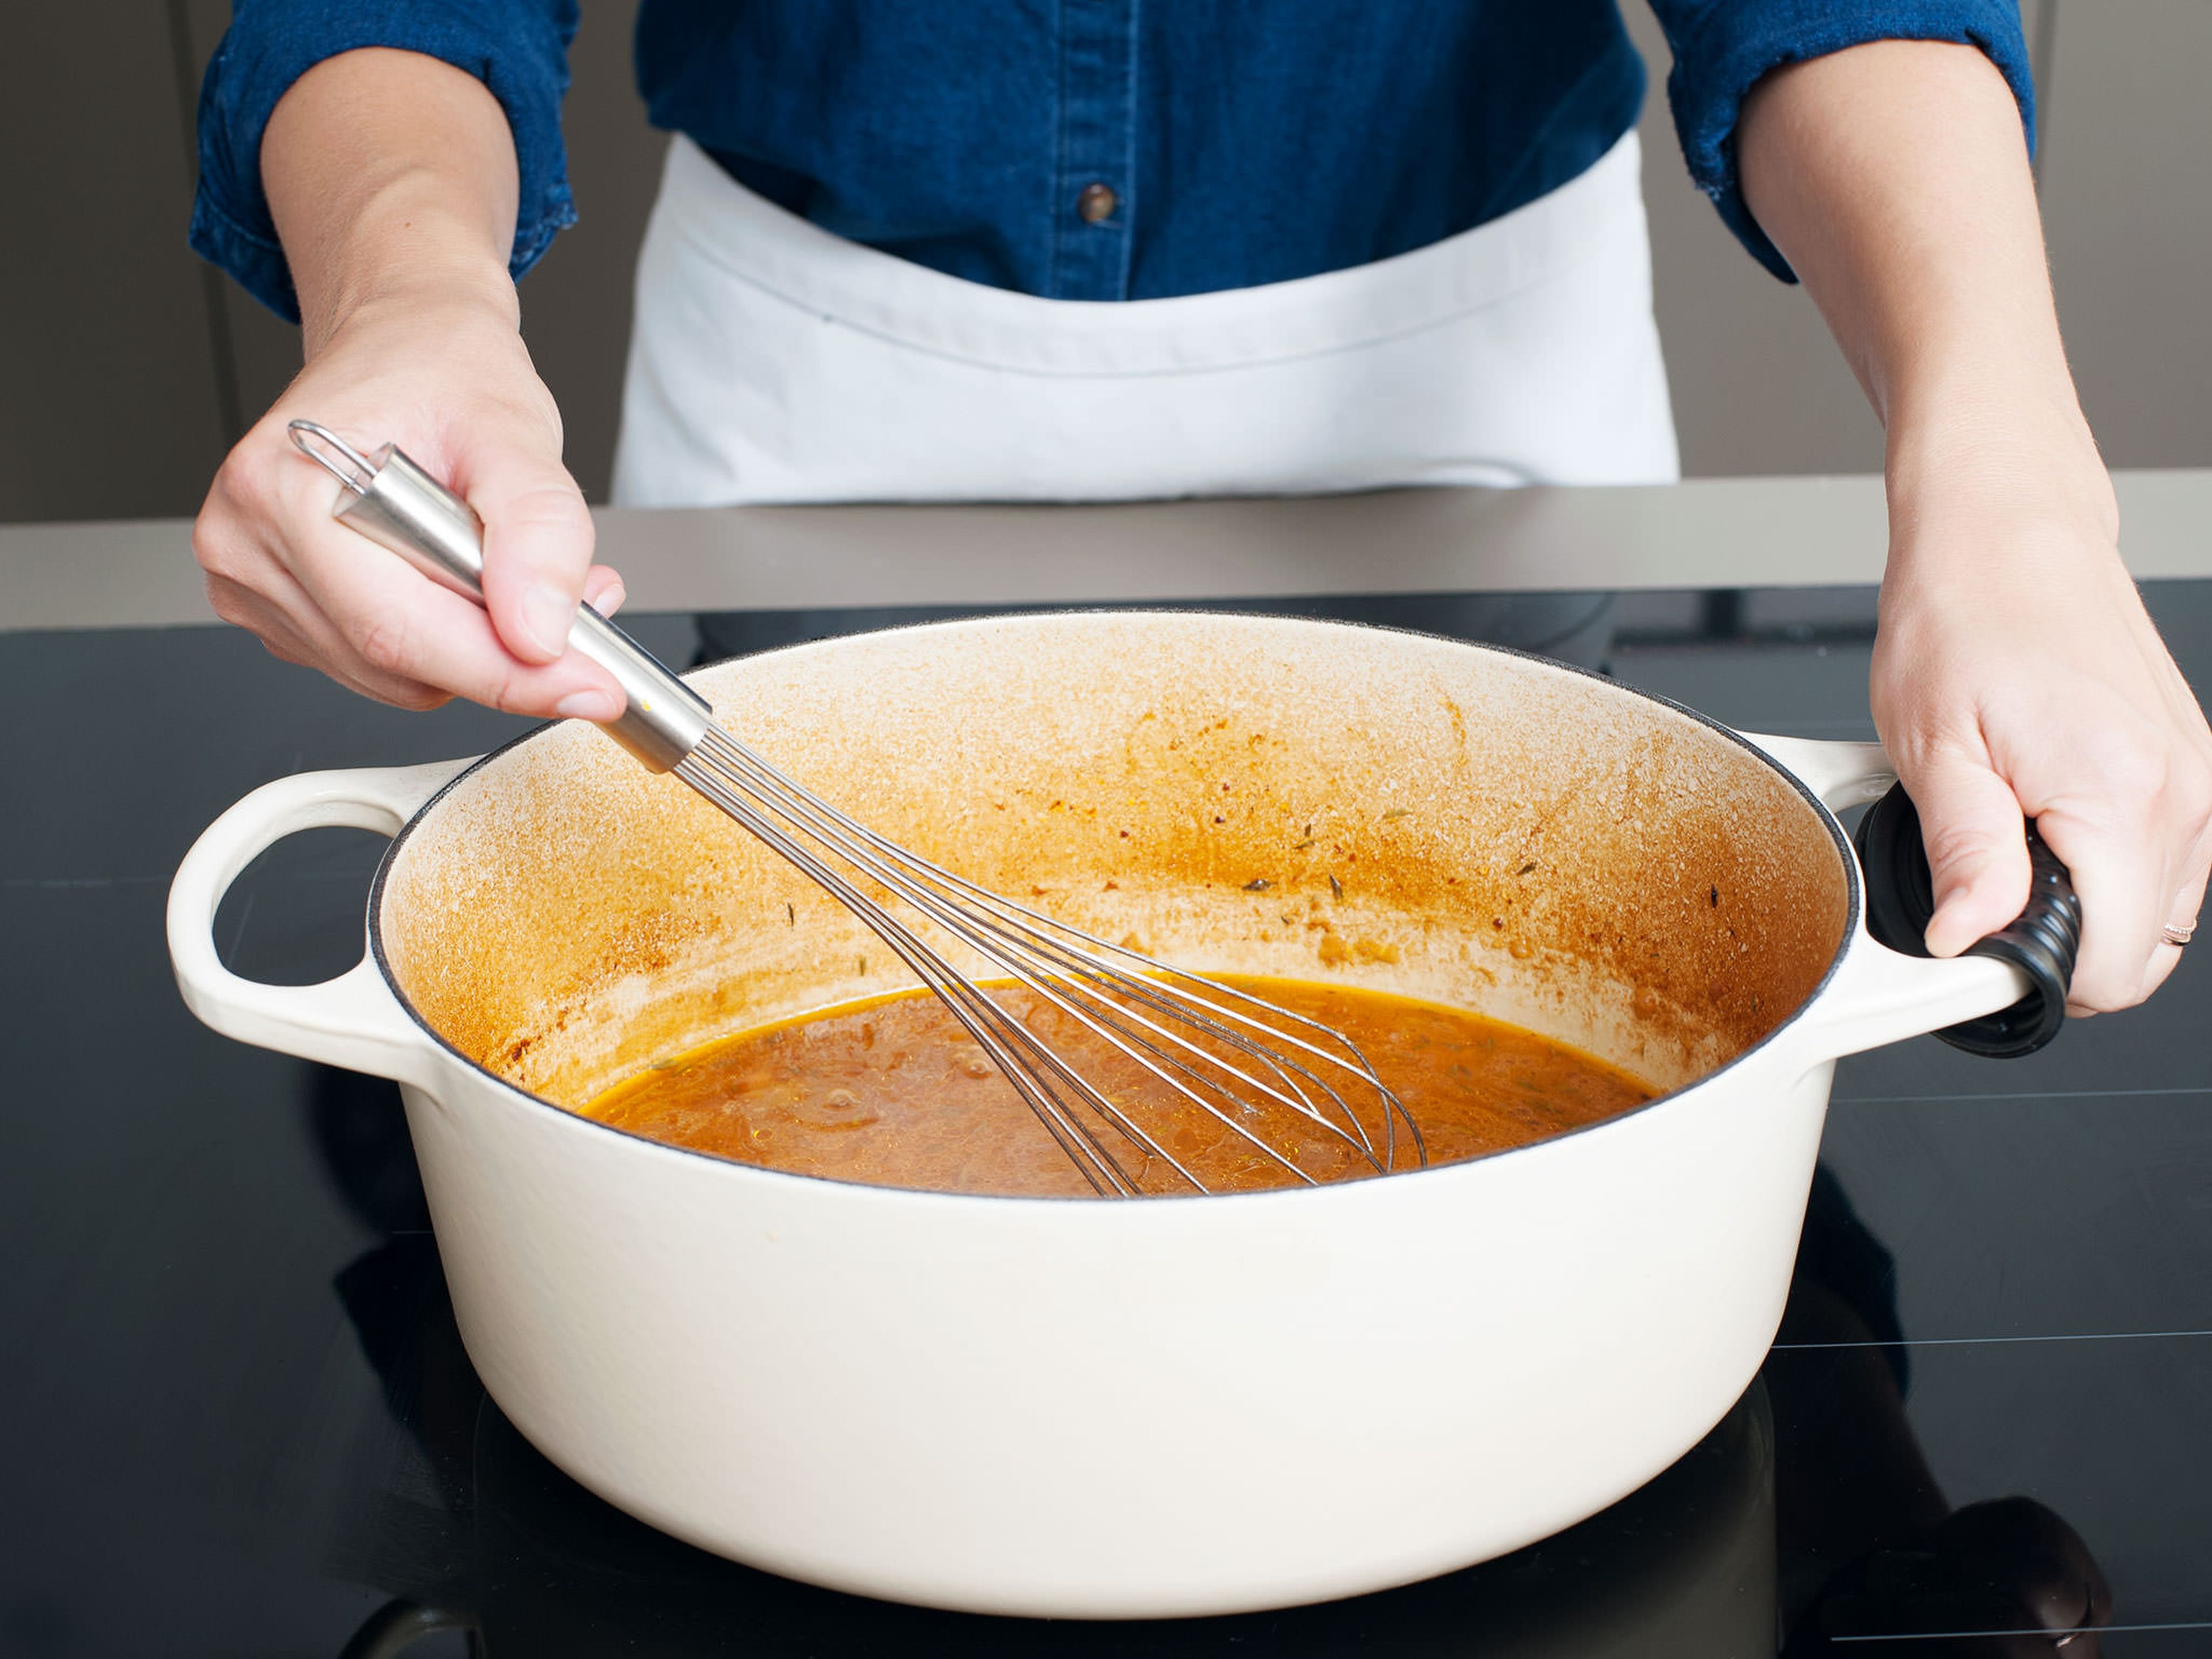 Meanwhile, bring pan juices to a simmer on medium-high heat and let reduce slightly. If desired, combine some more flour with some water to create a slurry, then whisk into sauce to thicken.